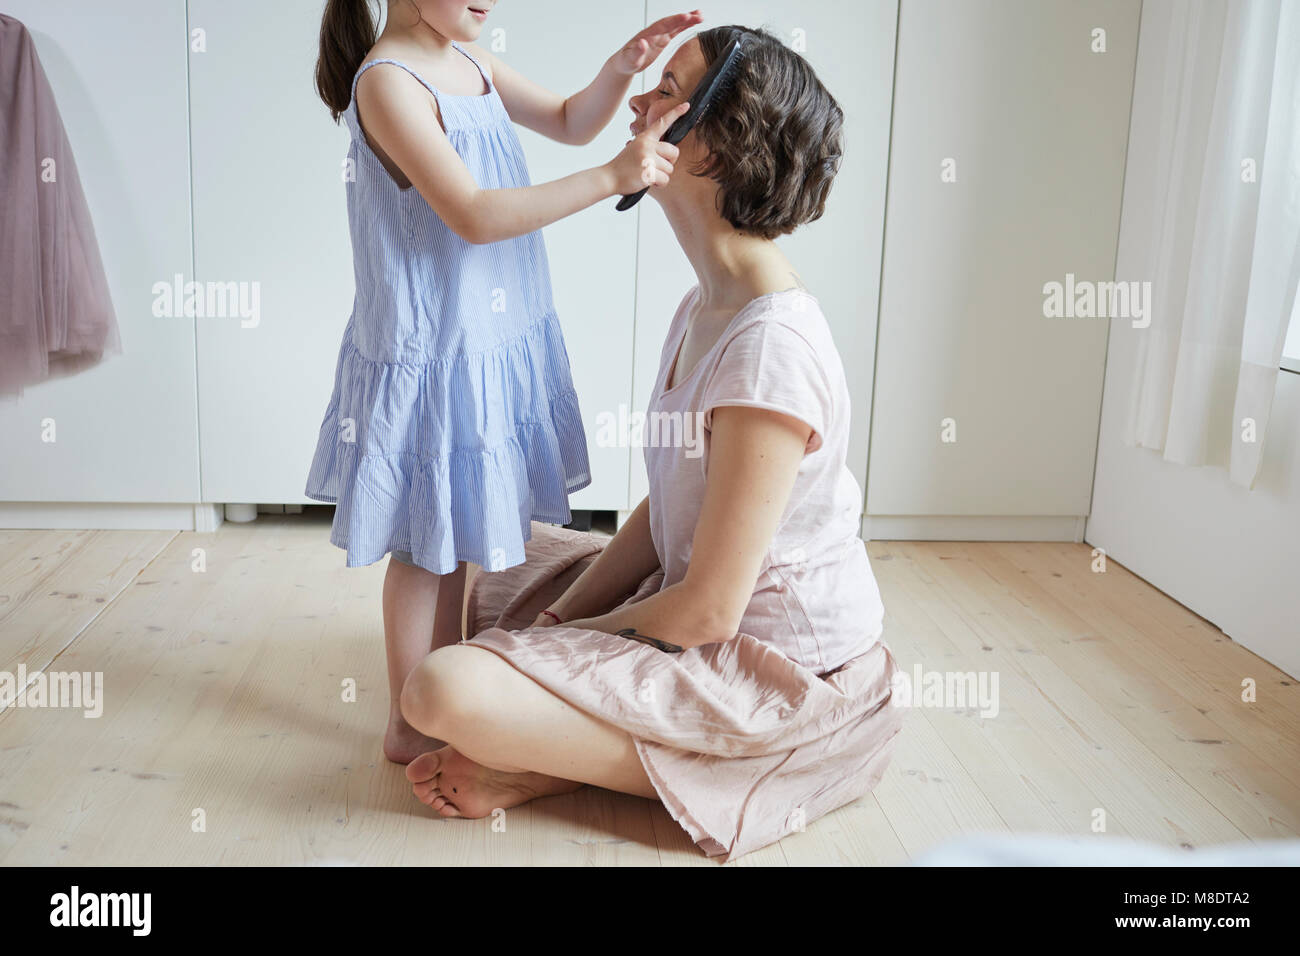 Mother sitting on floor, daughter brushing mother's hair, mid section Stock Photo